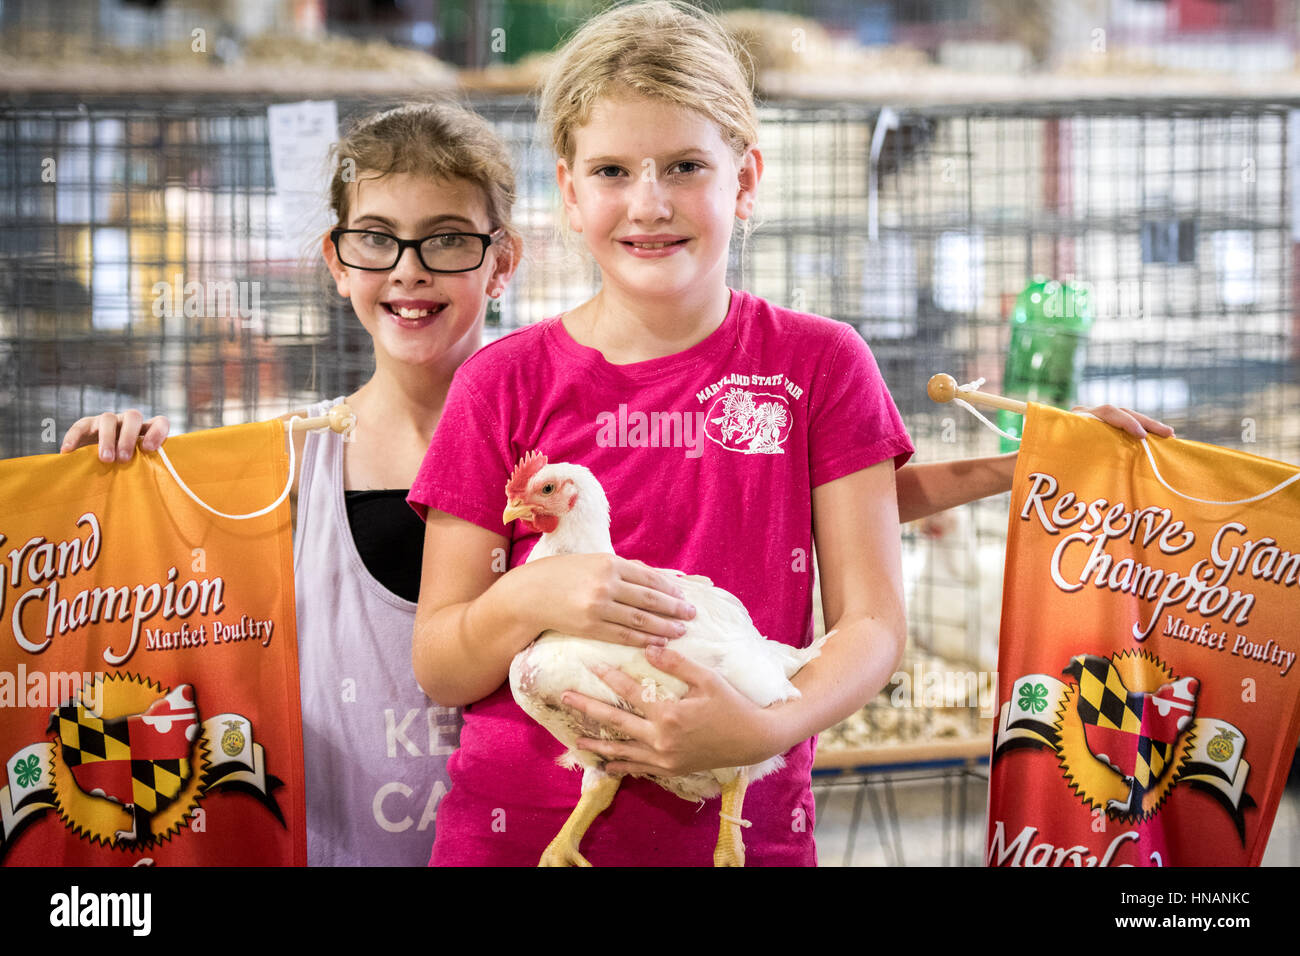 Timonium, Maryland - young girls pose with their champion banners and a small chicken at the 2016 Maryland State Fair. Stock Photo